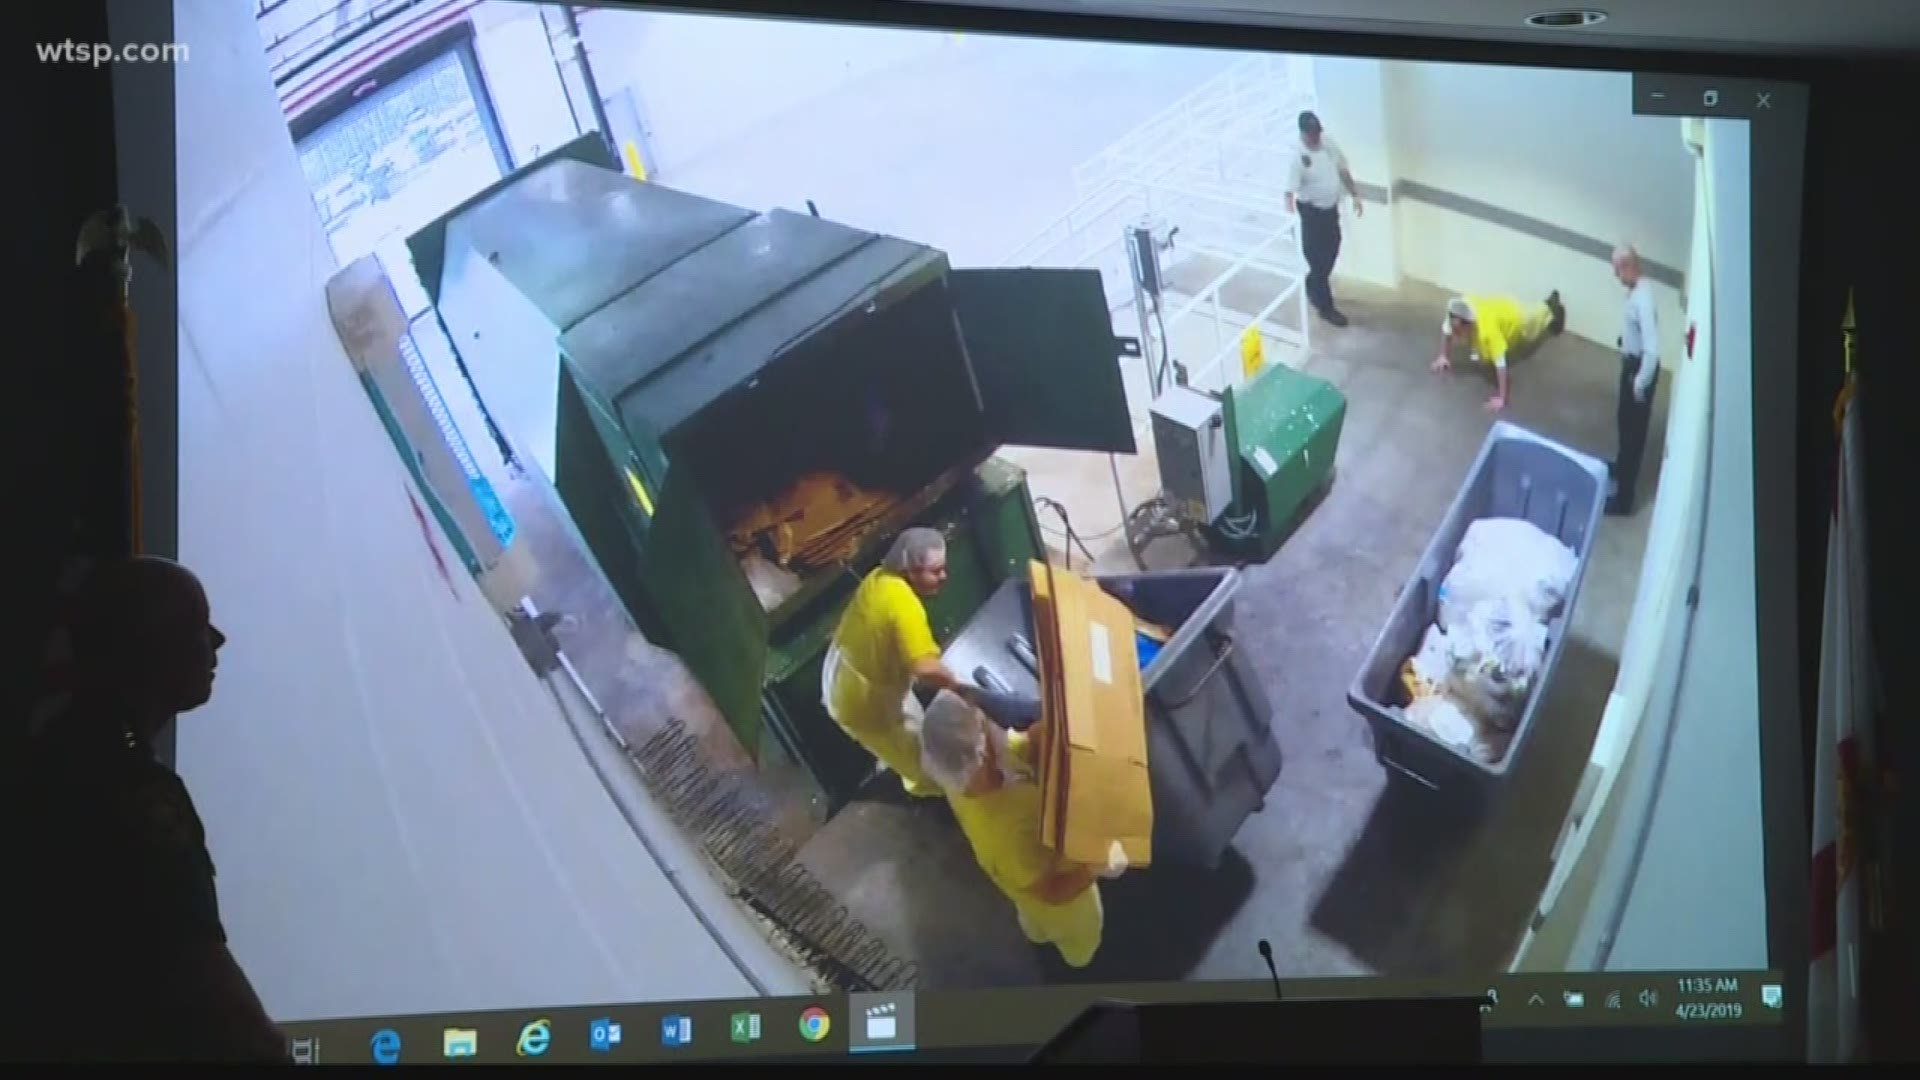 Surveillance video released Tuesday shows former Pinellas County deputy James Moran forced inmate Mario Christo to do pushups inside the Pinellas County Jail. The video also shows Moran kicking Christo in the ribs.